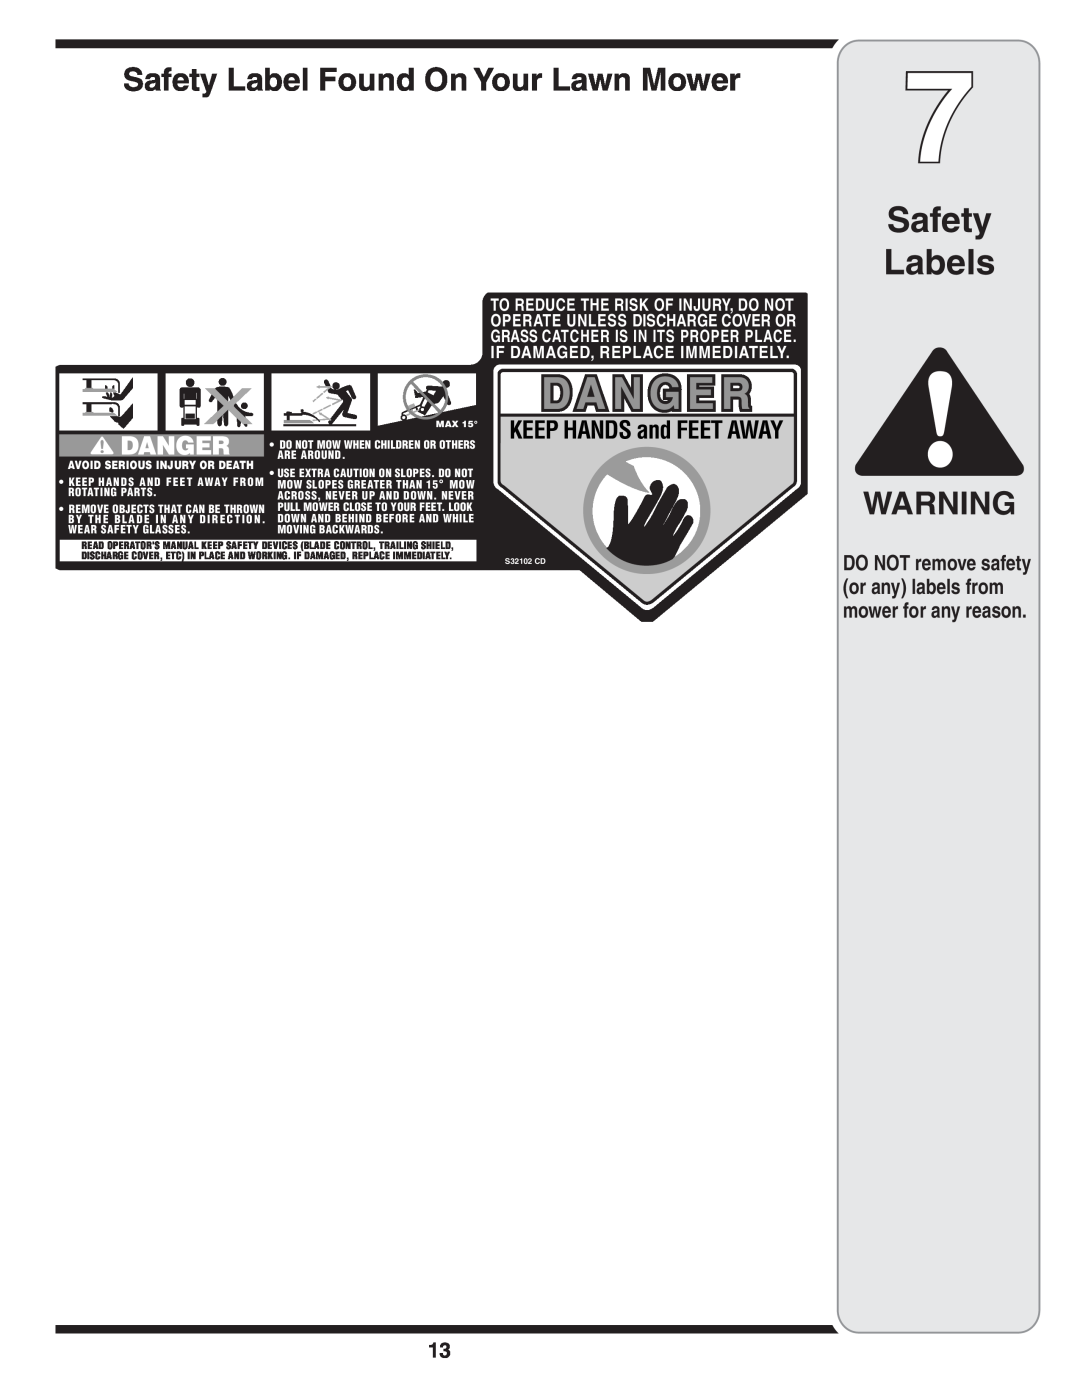 MTD Series 410 thru 420 warranty Safety Labels, Safety Label Found On Your Lawn Mower, KEEP HANDS and FEET AWAY, Are Around 